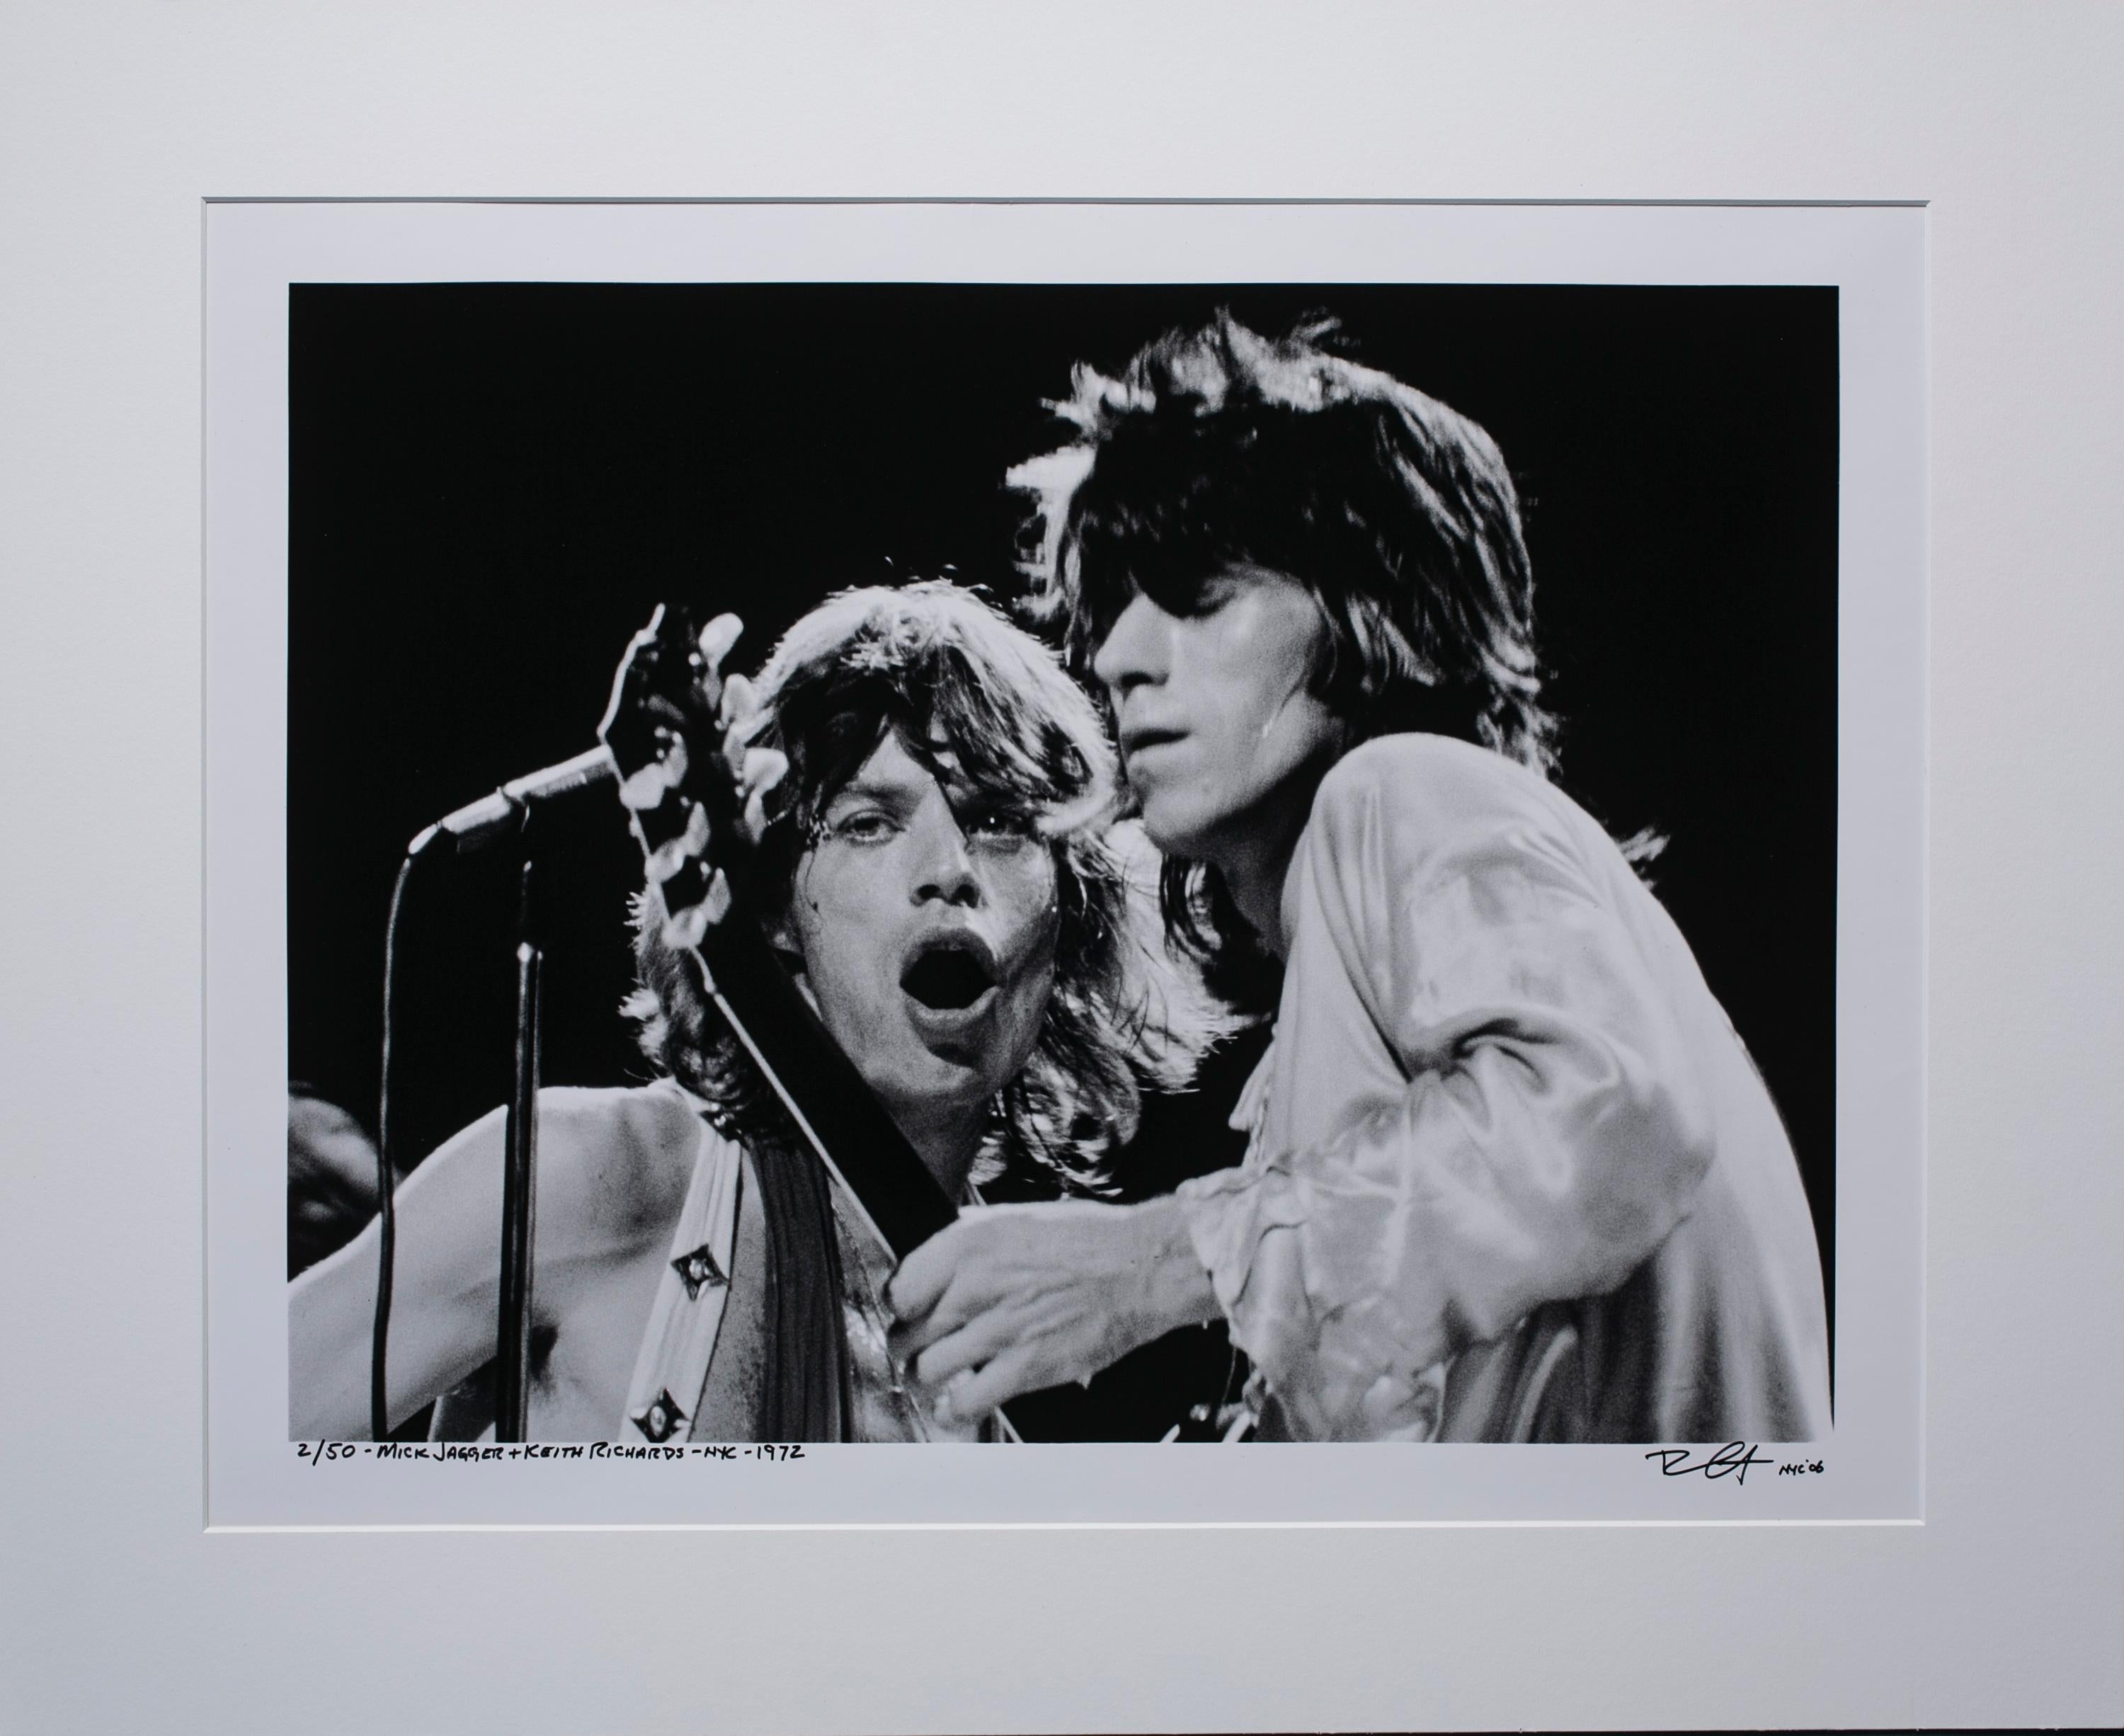 Richard E. Aaron Black and White Photograph - Mick and Keith 1972 at the Microphone